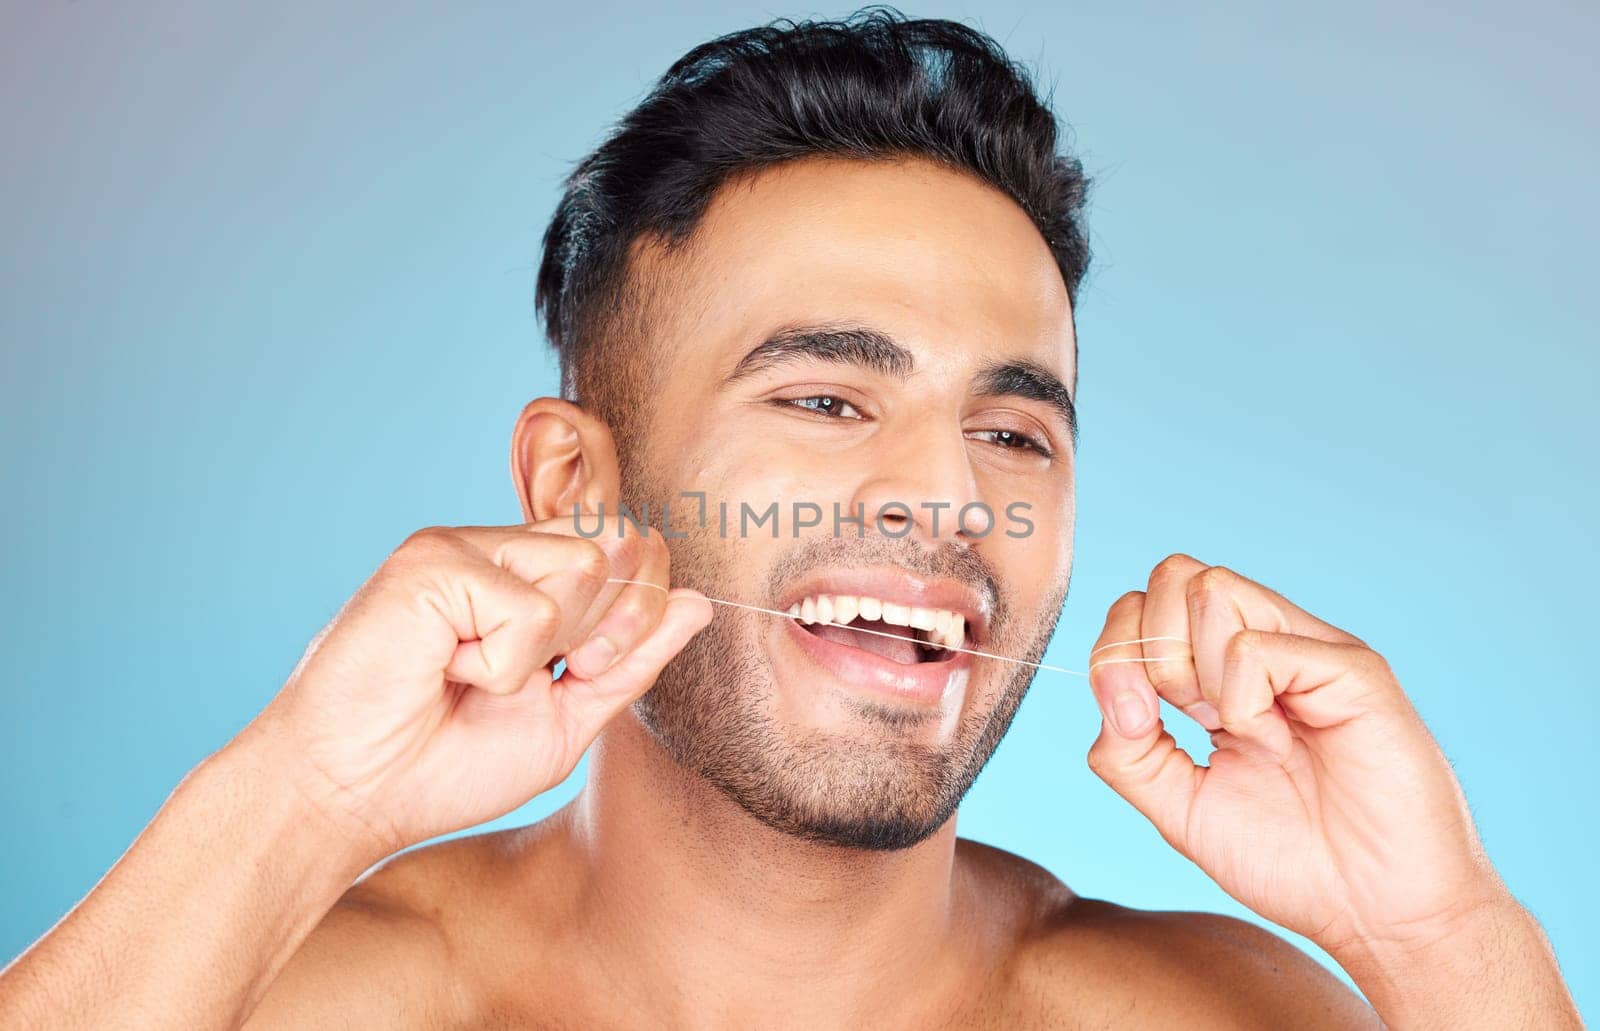 Floss, Mexican man and dental health for smile, fresh breath and after brushing teeth against blue studio background. Oral health, Latino male and string to clean mouth, hygiene and morning routine. by YuriArcurs